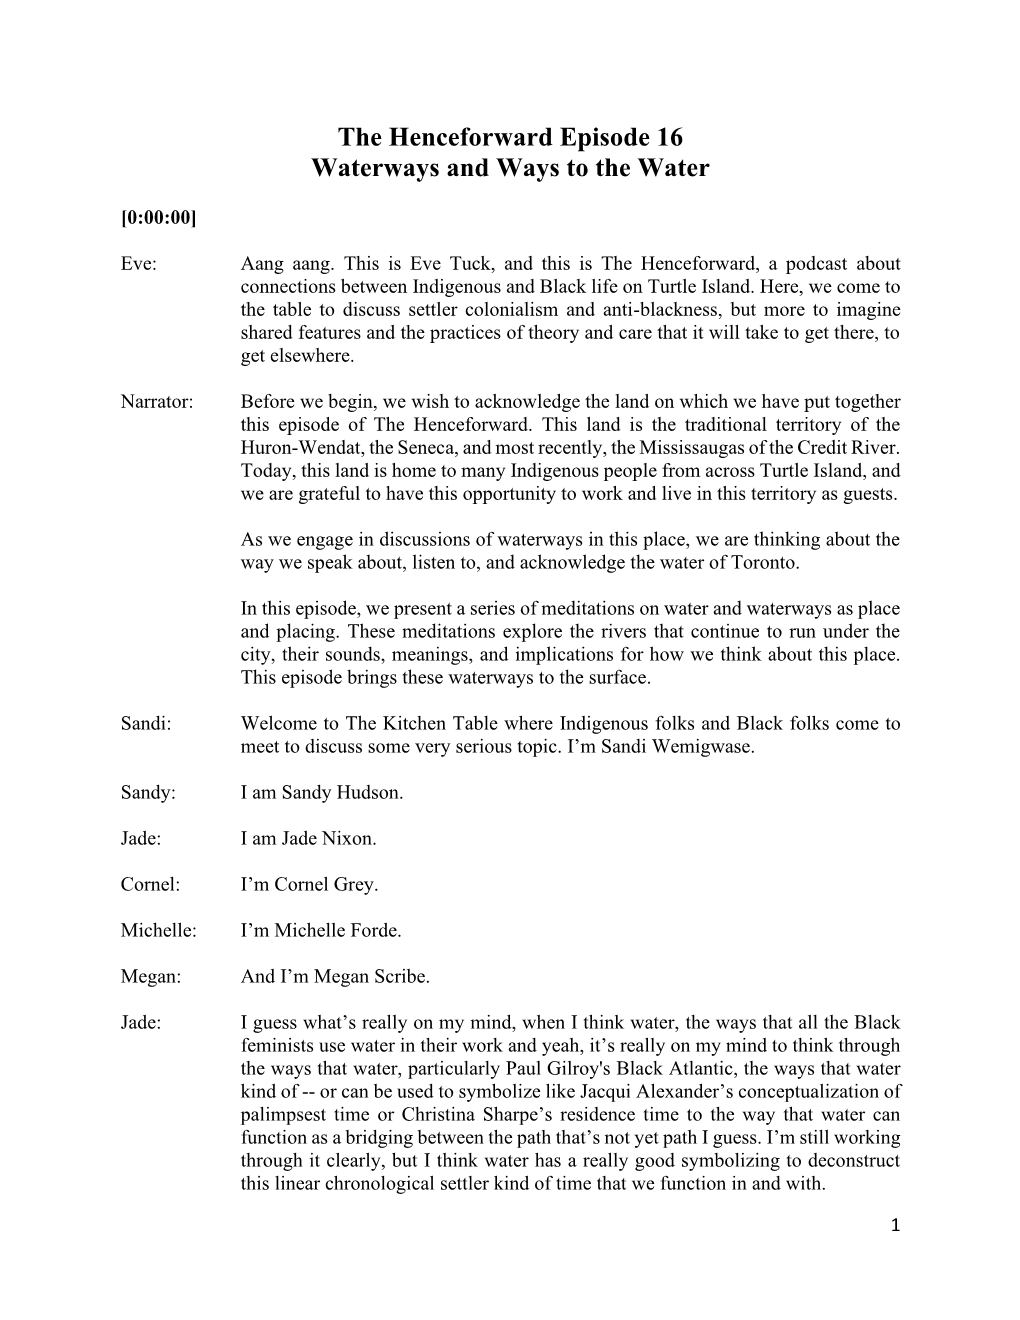 The Henceforward Episode 16 Waterways and Ways to the Water